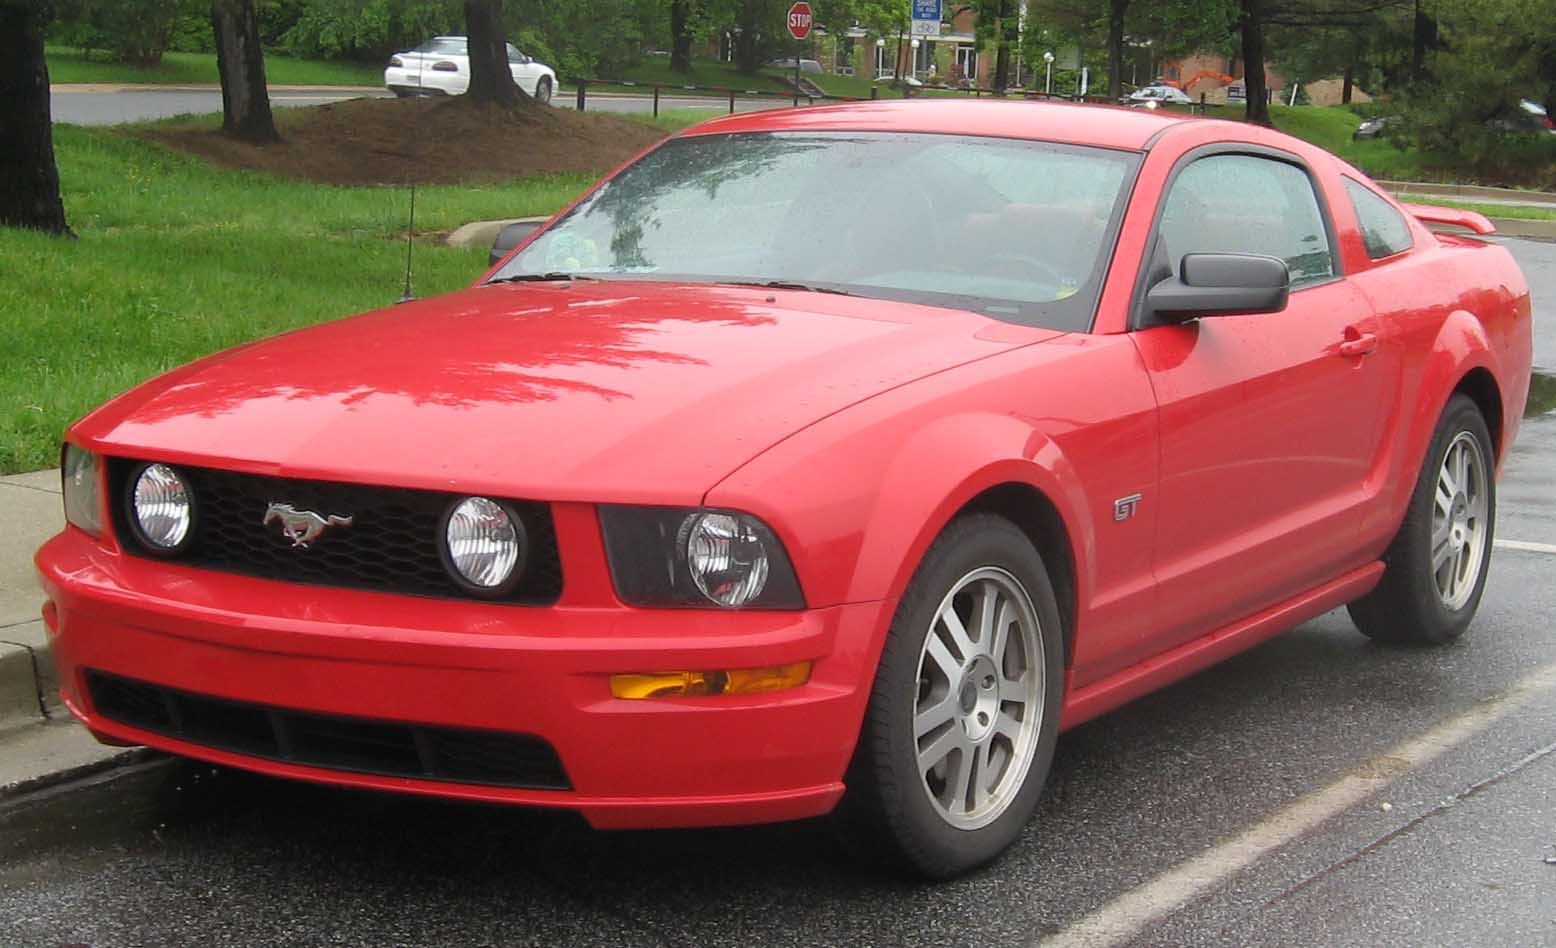 Ford mustang gt generations #1